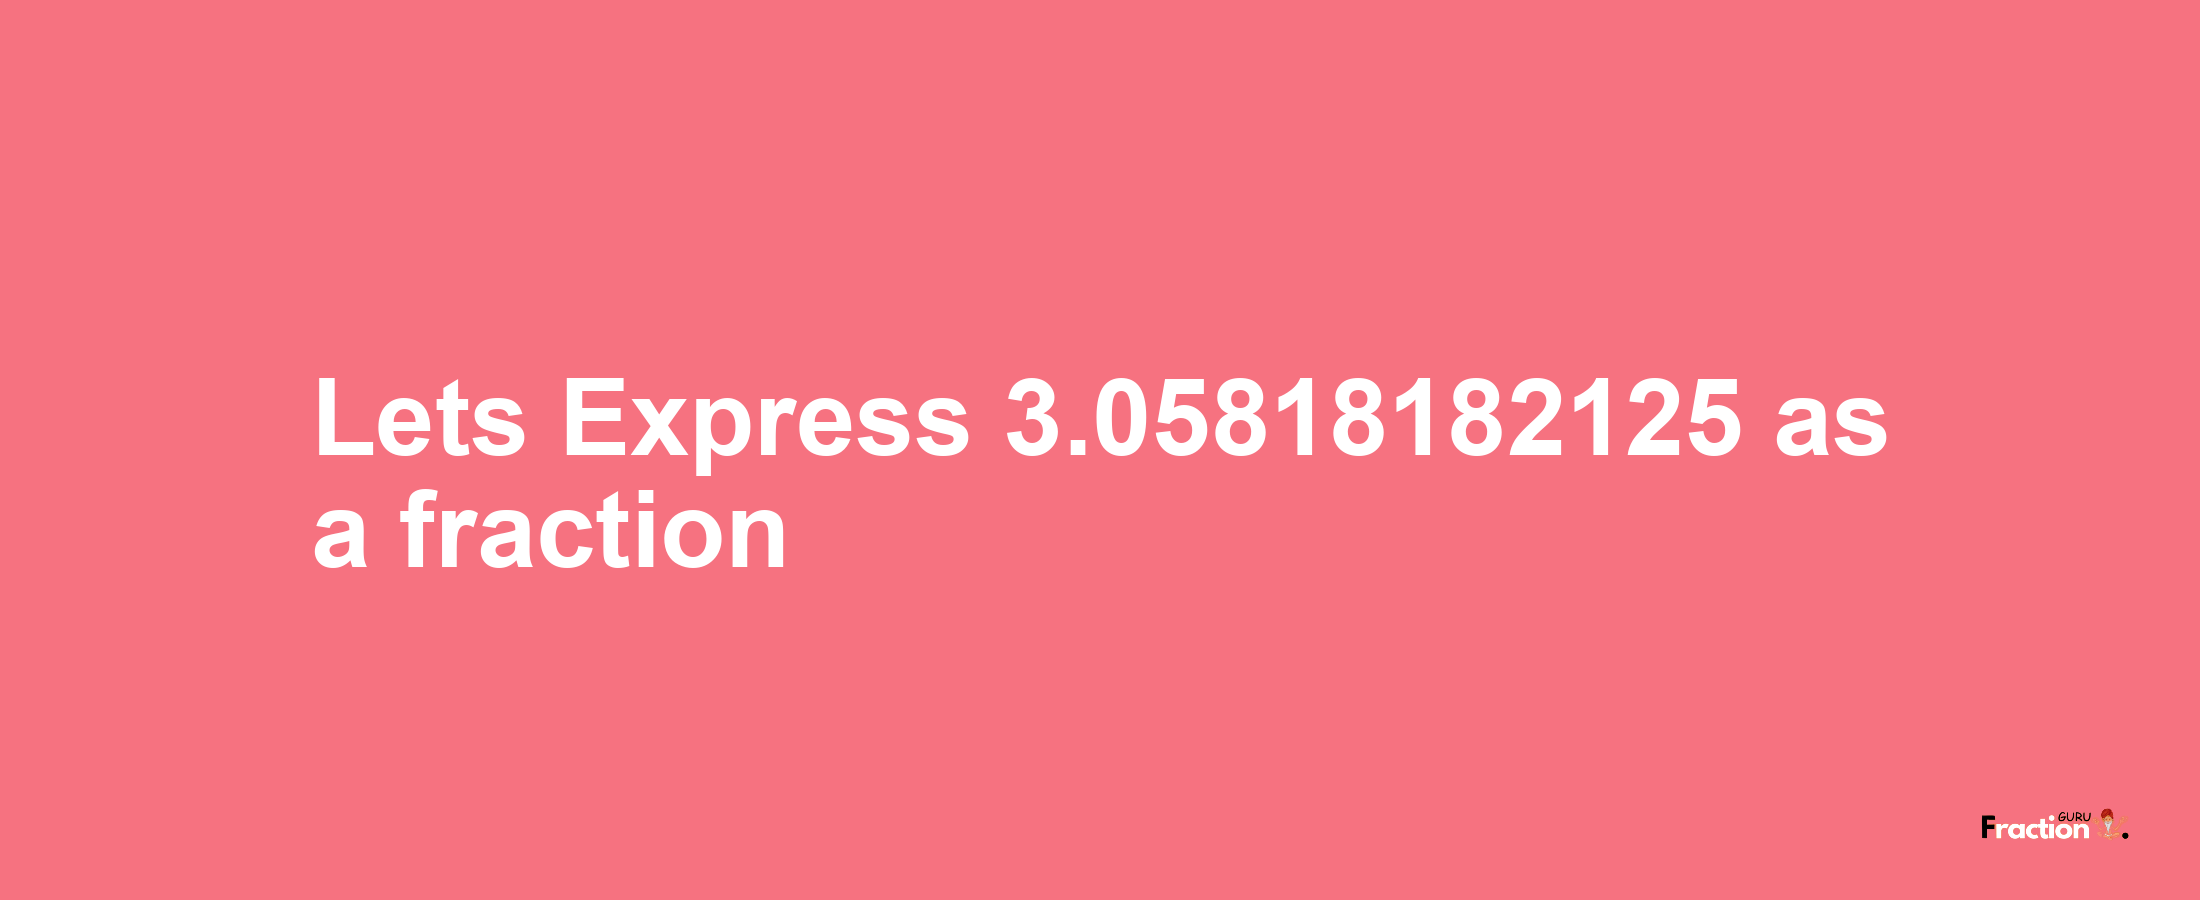 Lets Express 3.05818182125 as afraction